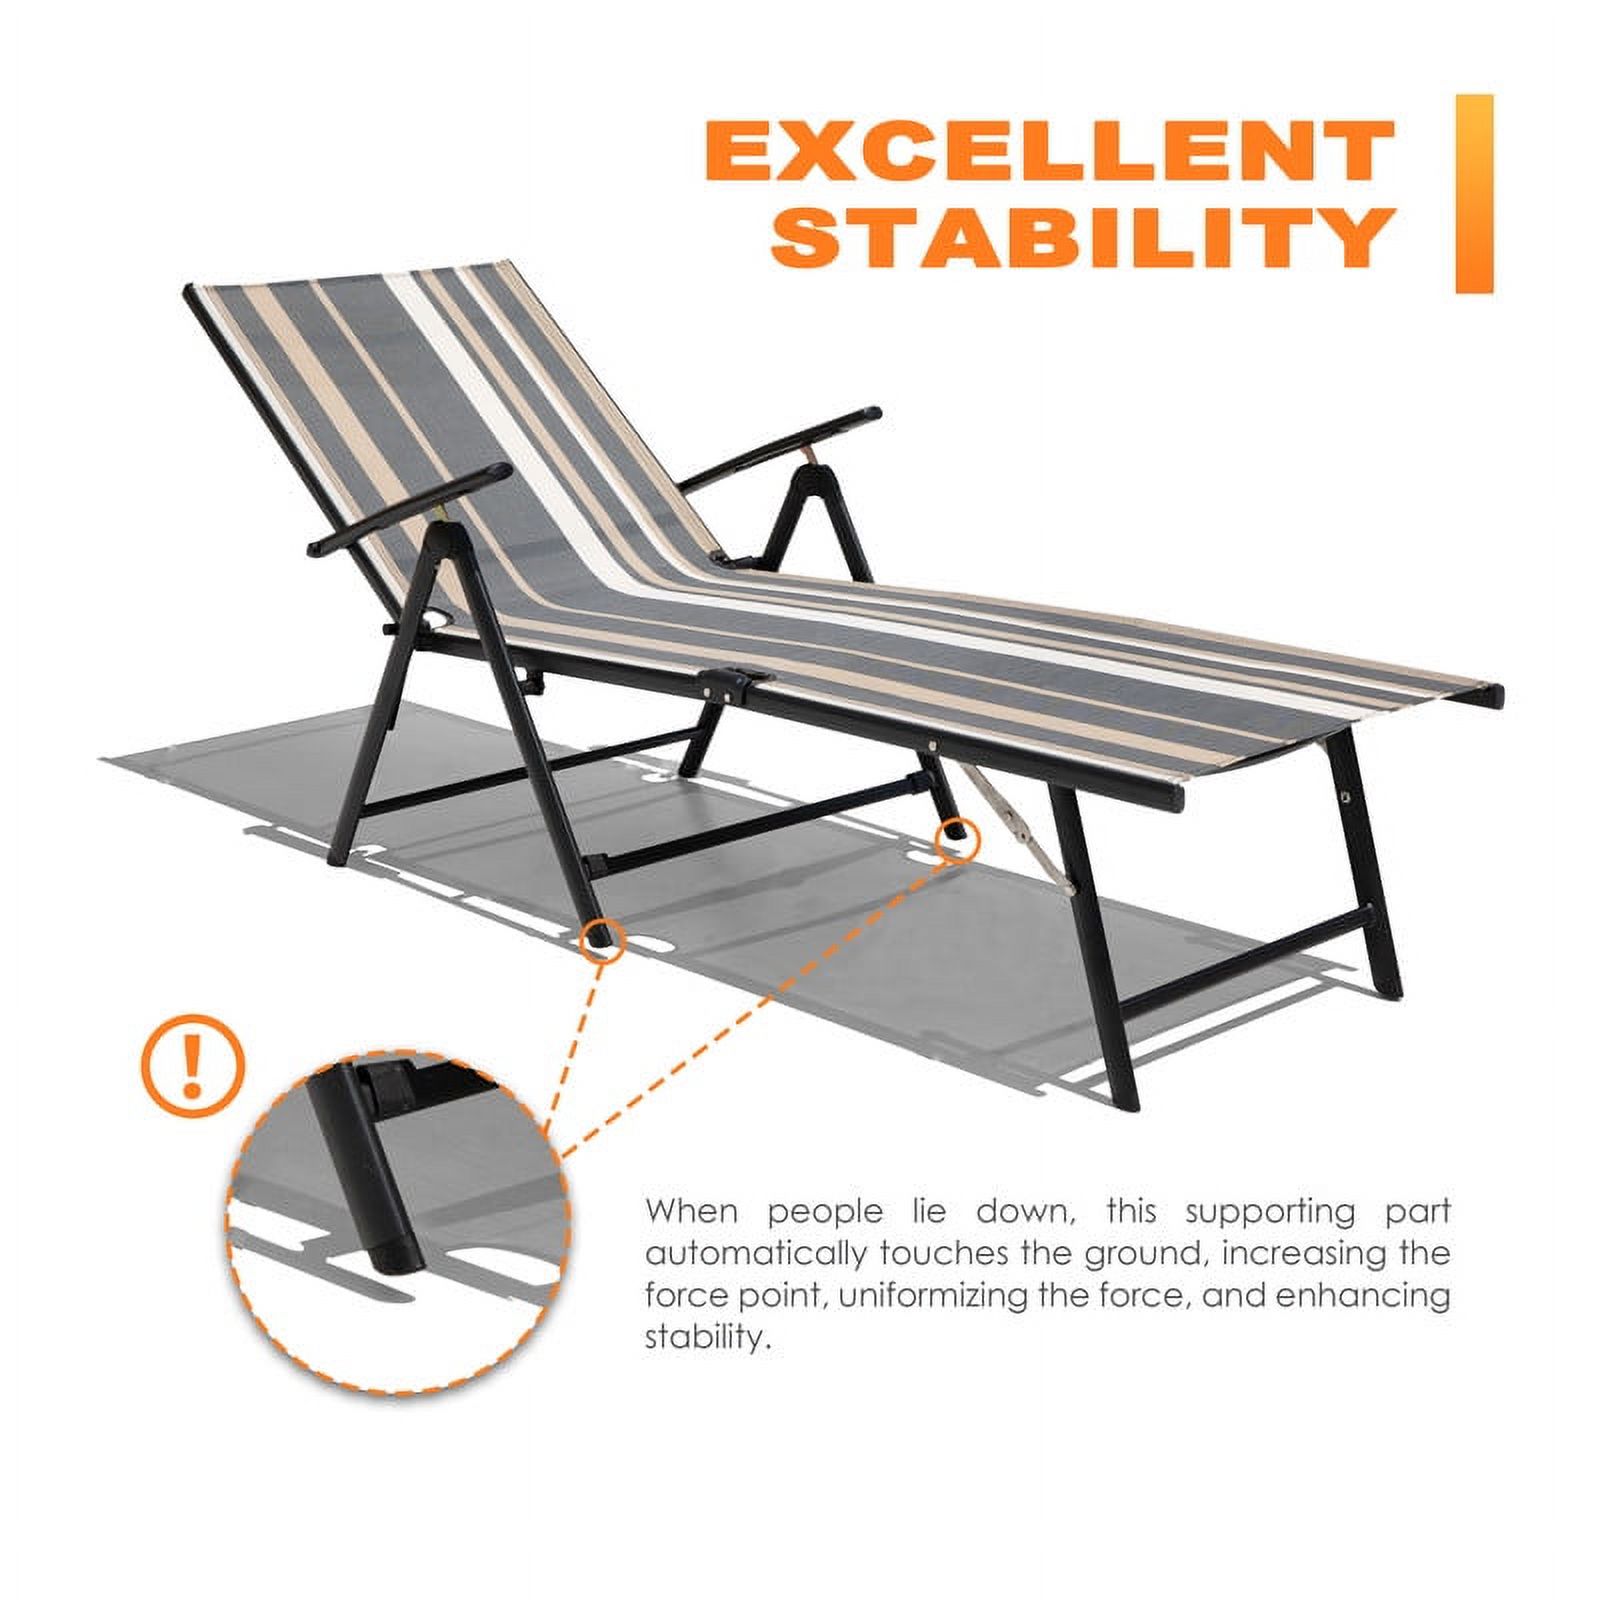 Nuu Garden Outdoor Patio Chaise Lounge Chair Adjustable Folding Pool Lounger w/ Steel Frame - Stripe - image 4 of 9